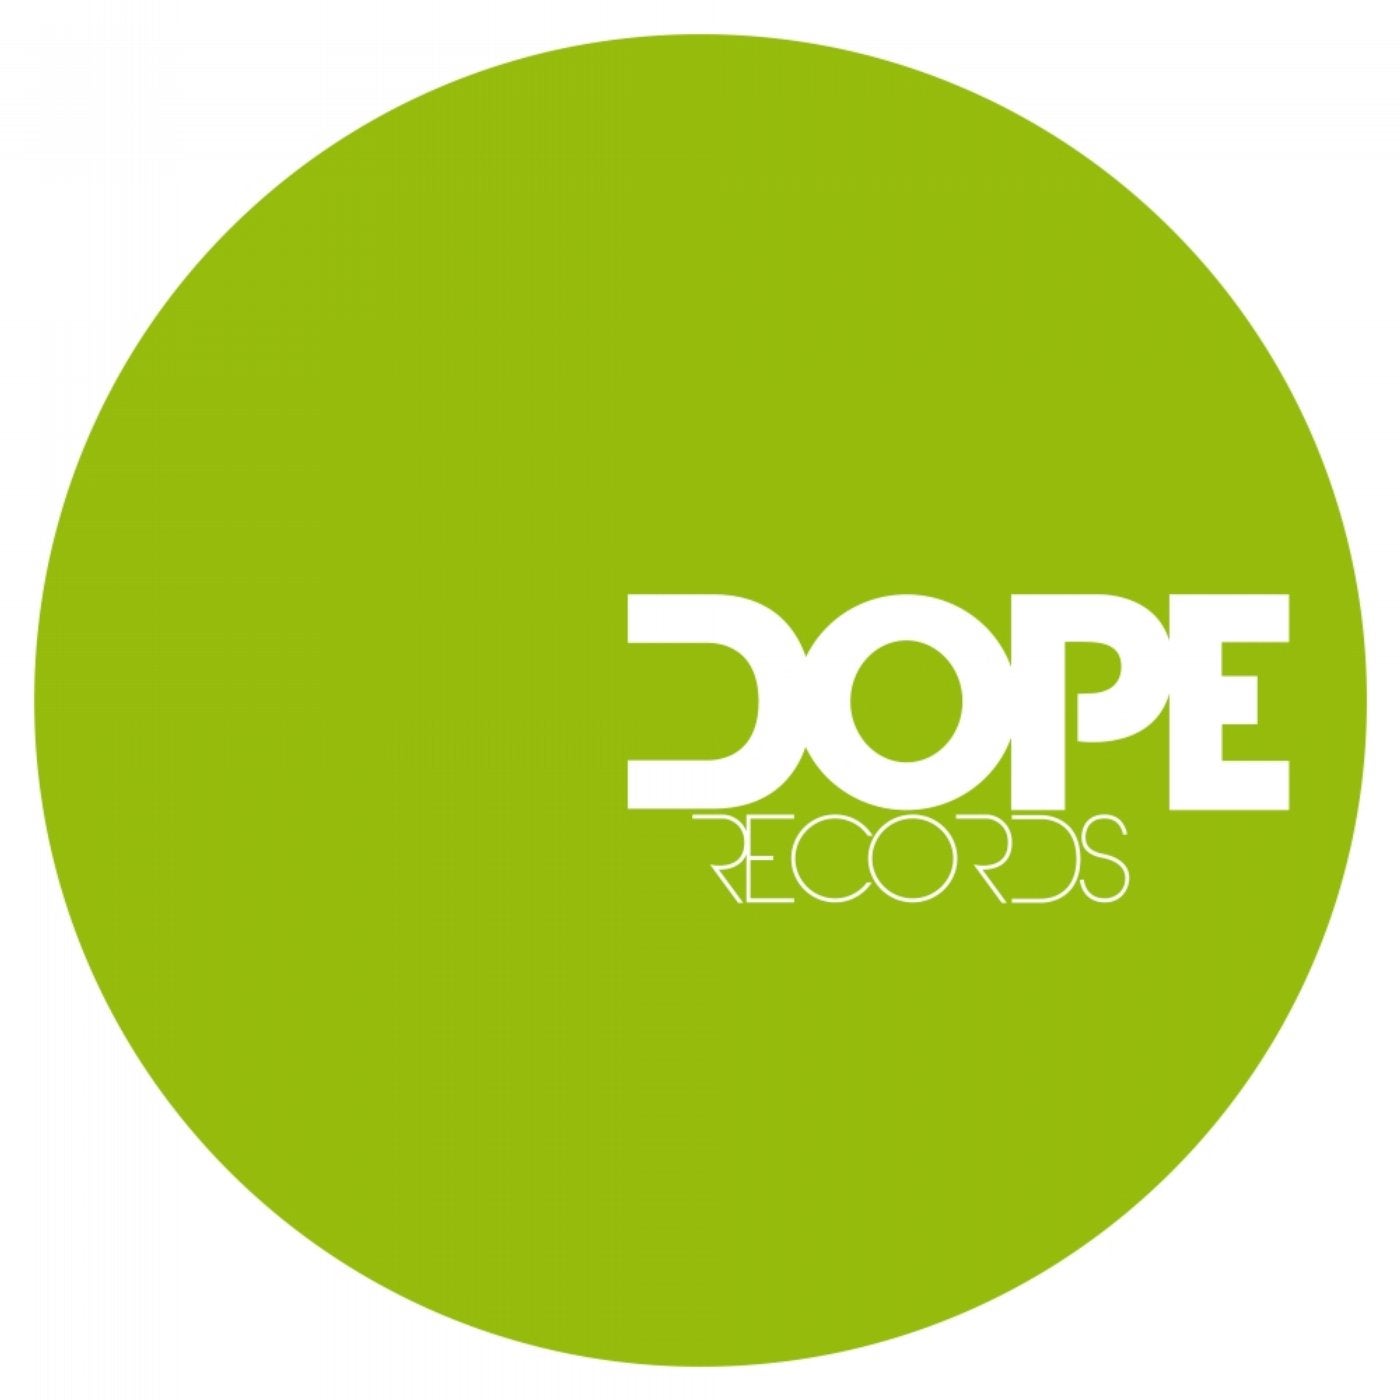 Dope Records artists & music download - Beatport